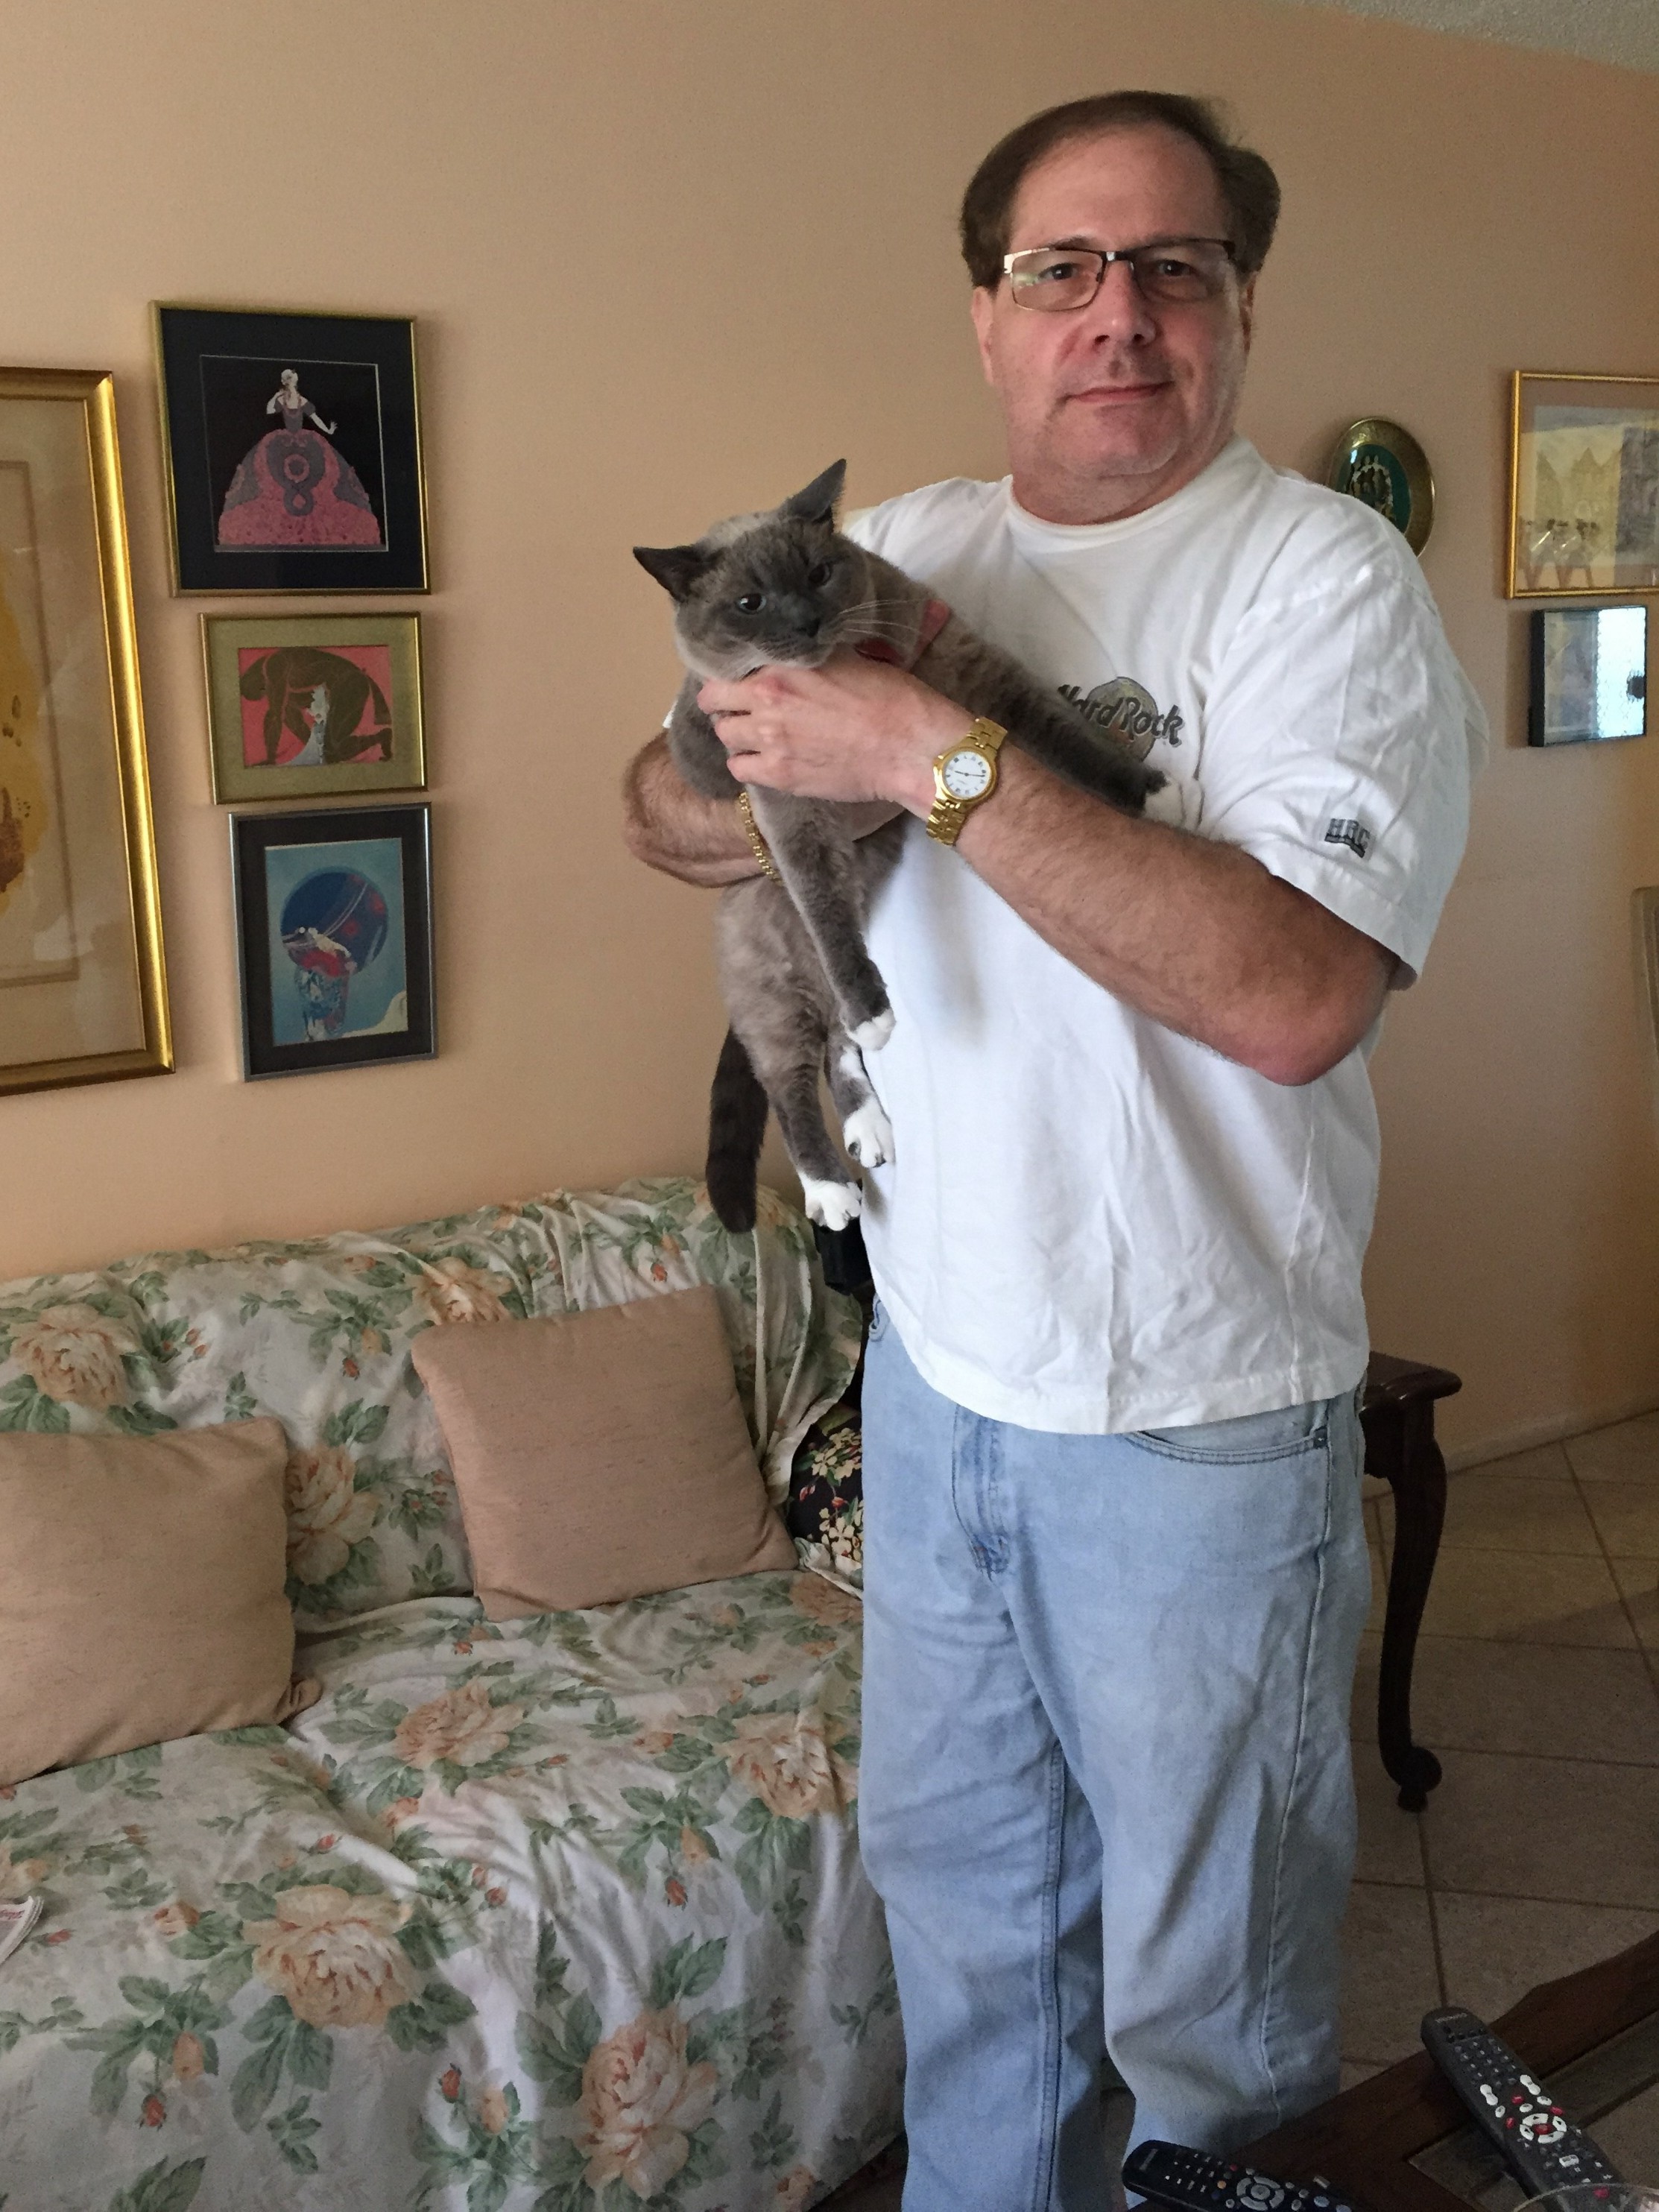 Barry holds mom's kitty cat, Miss Kitty.